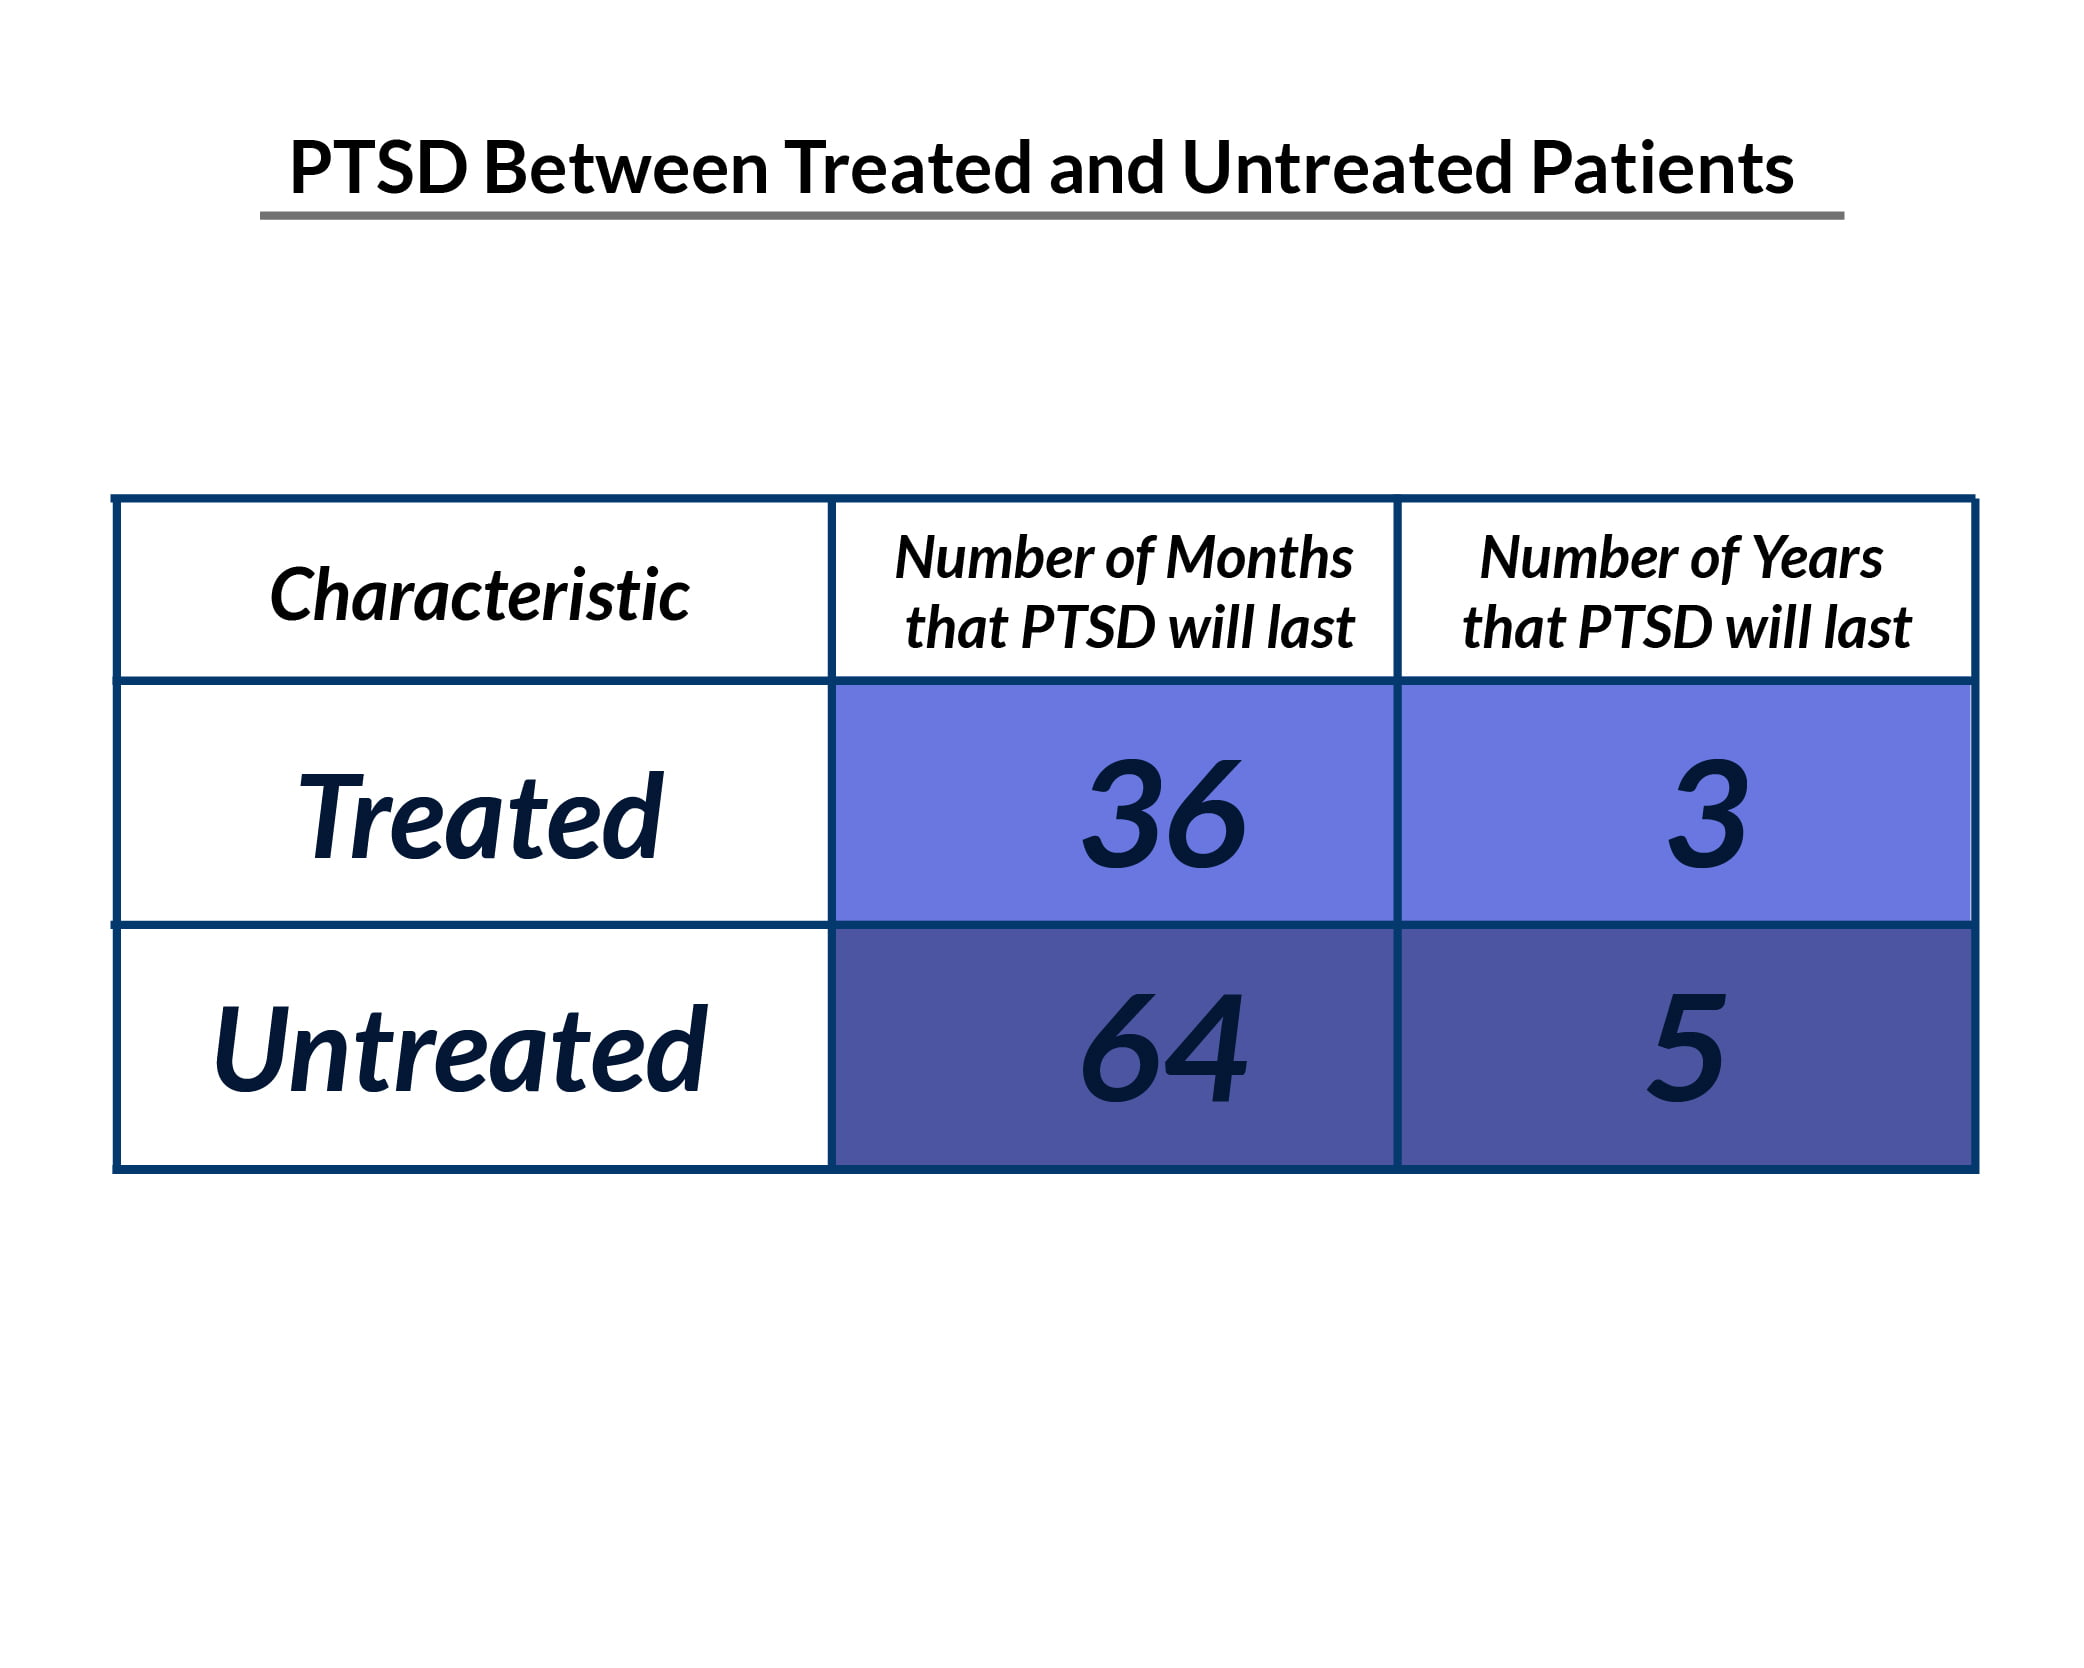 Graph chart of treated and untreated PTSD patients